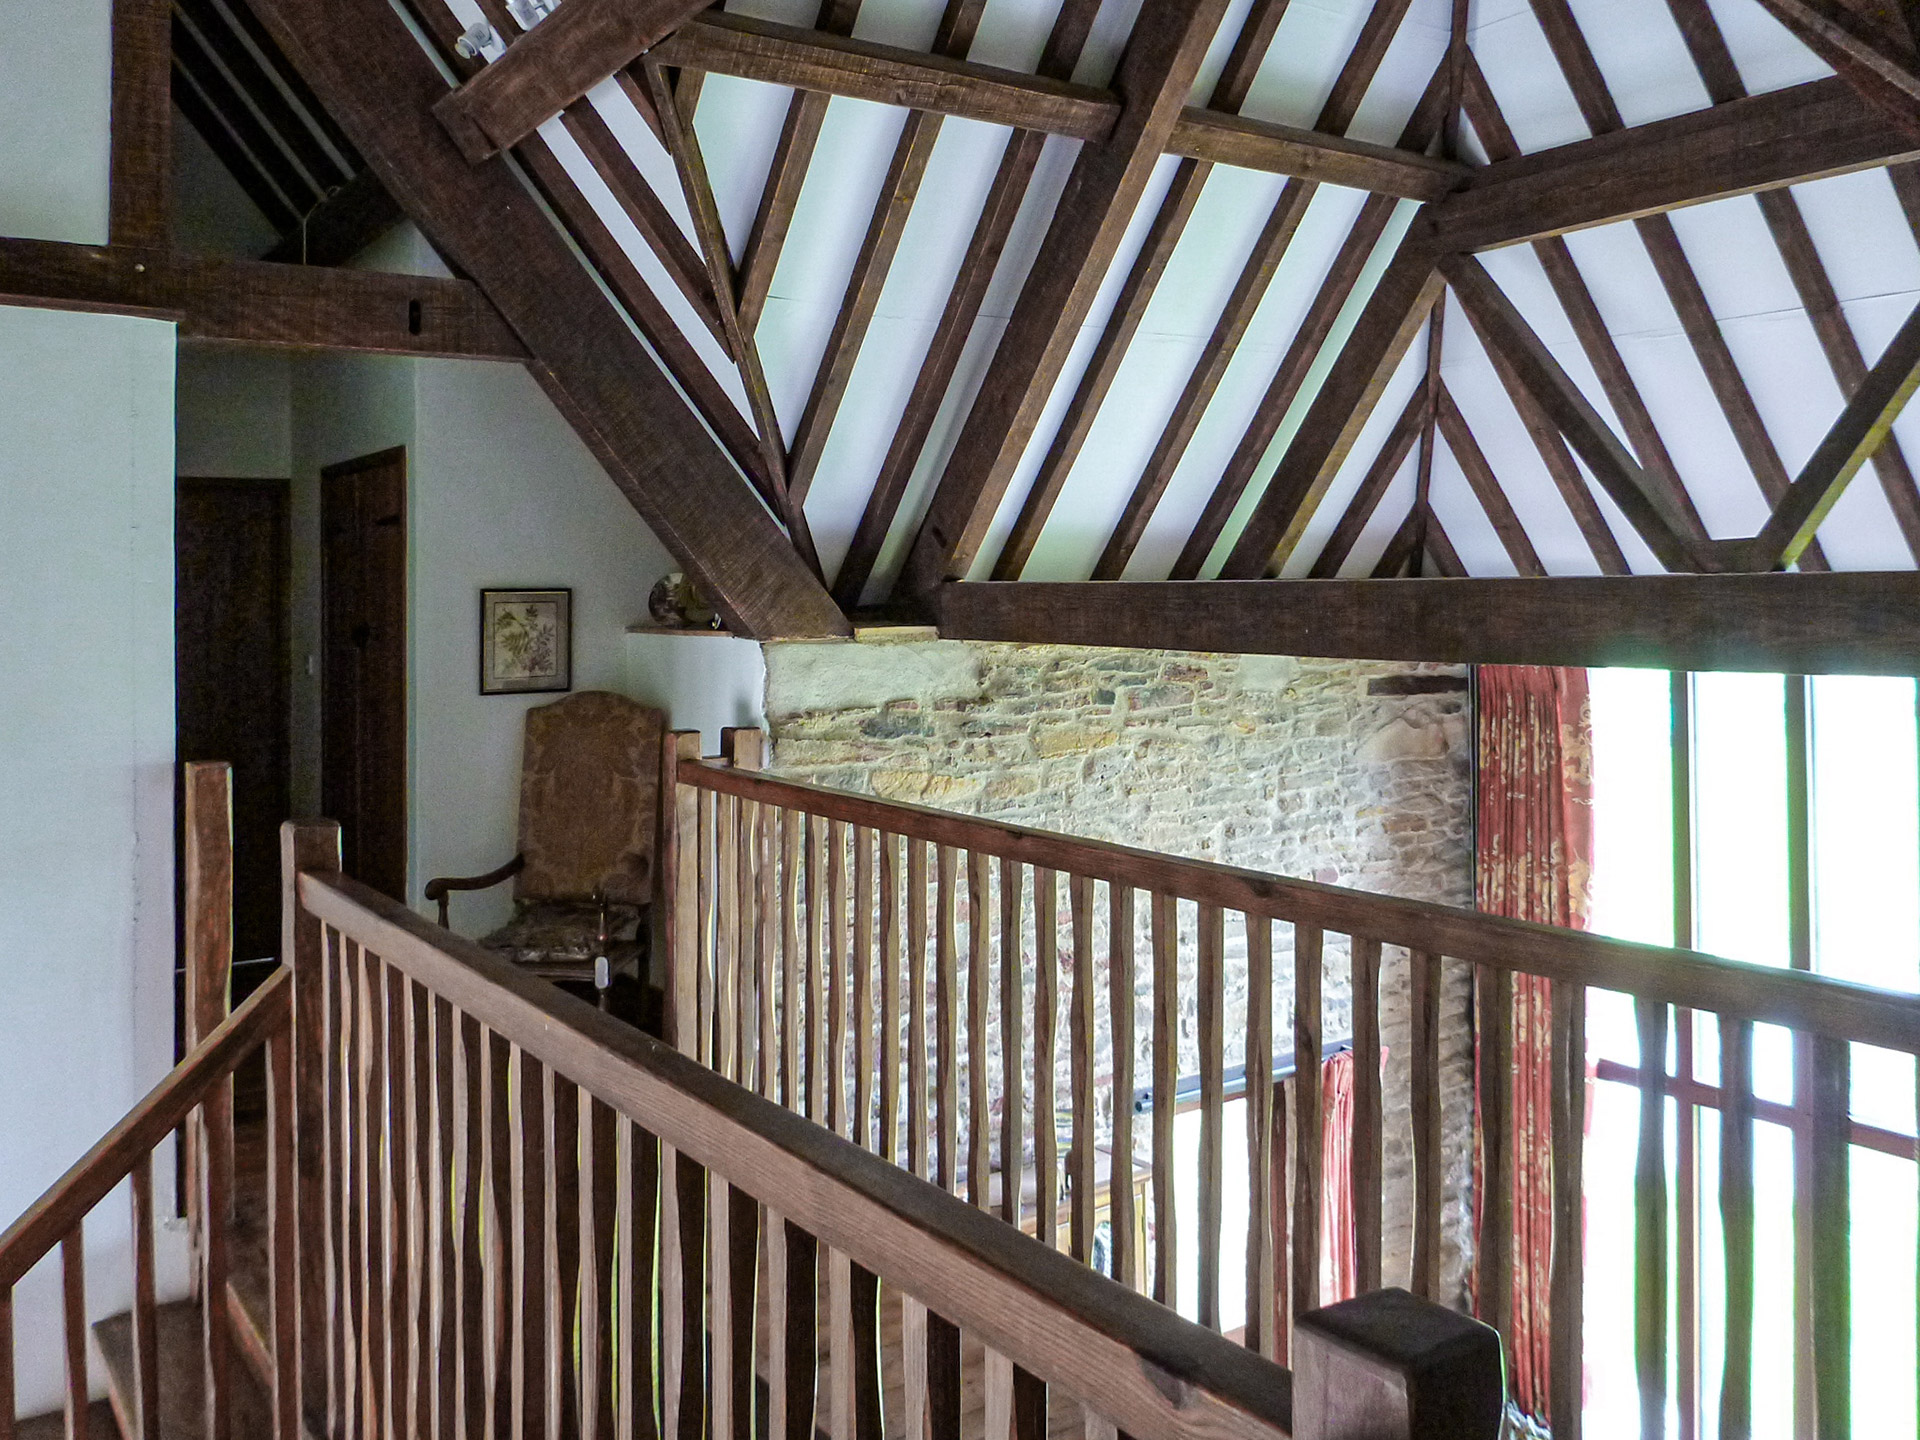 Vaulted ceiling with exposed timber beams and trusses